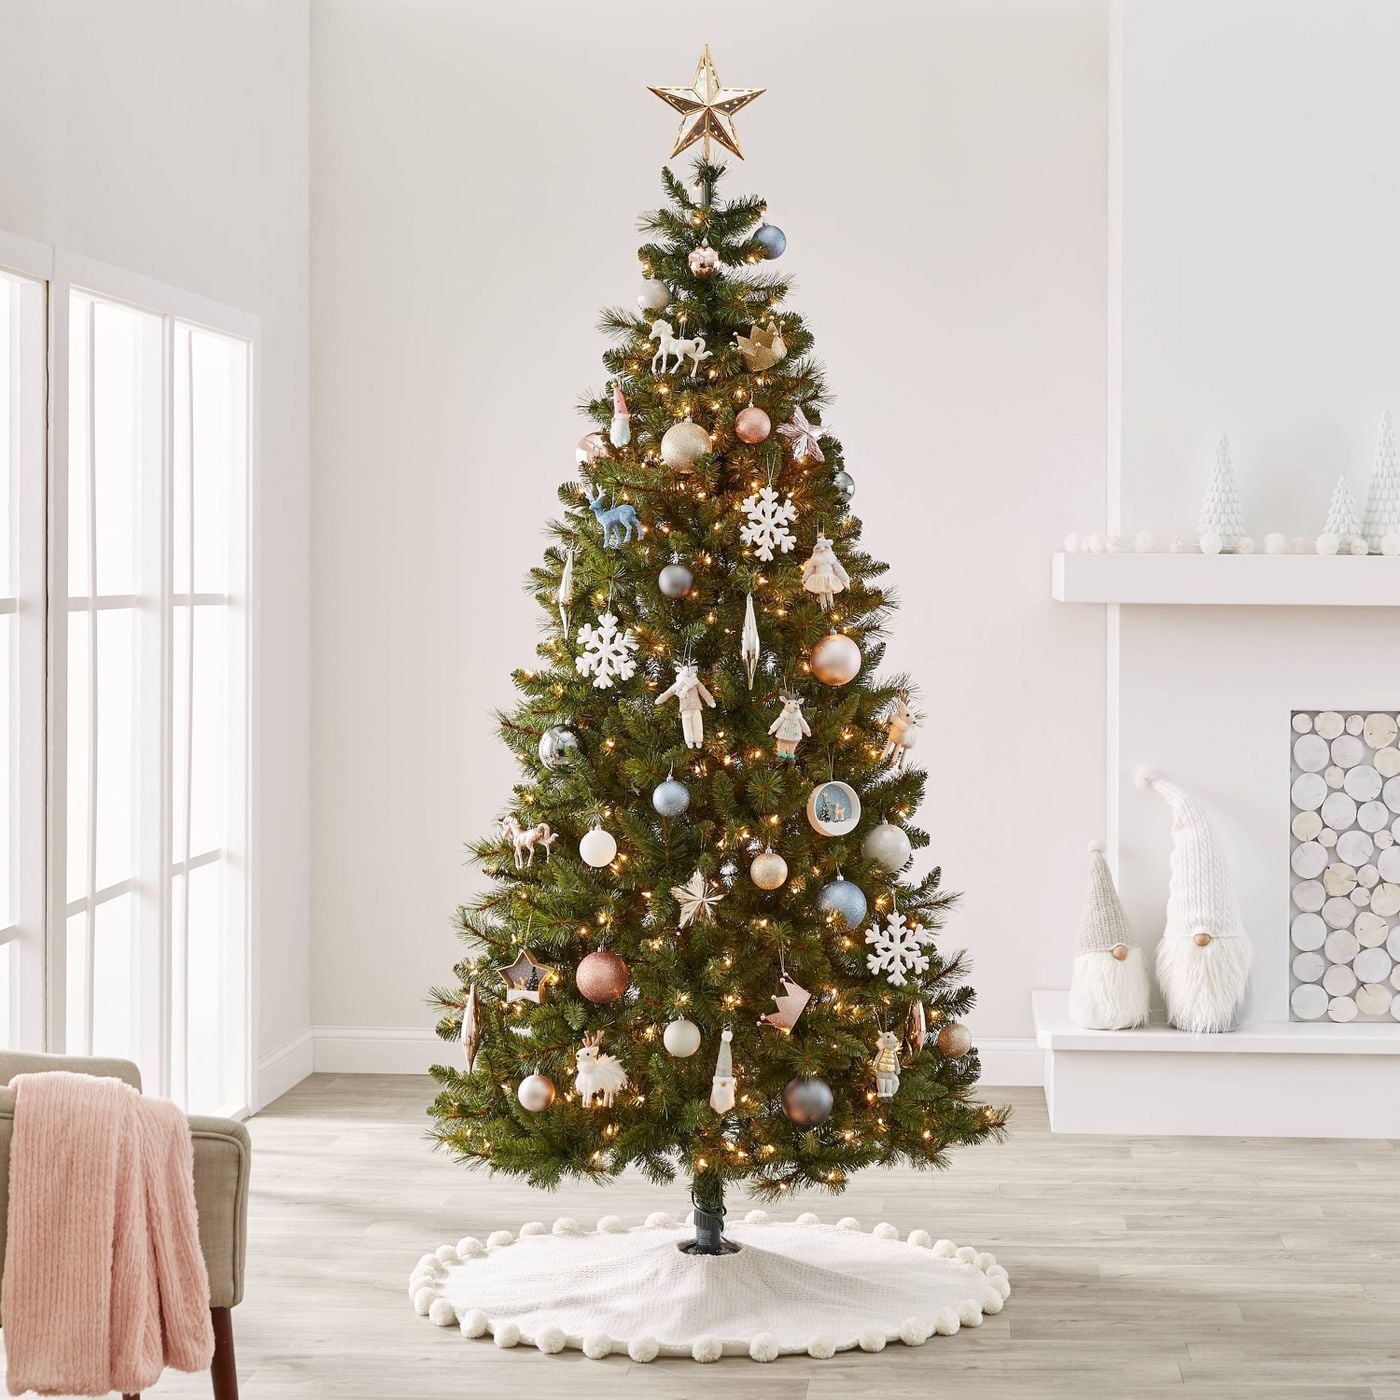 Target Is Selling Themed Christmas Tree Decorating Kits Popsugar Home